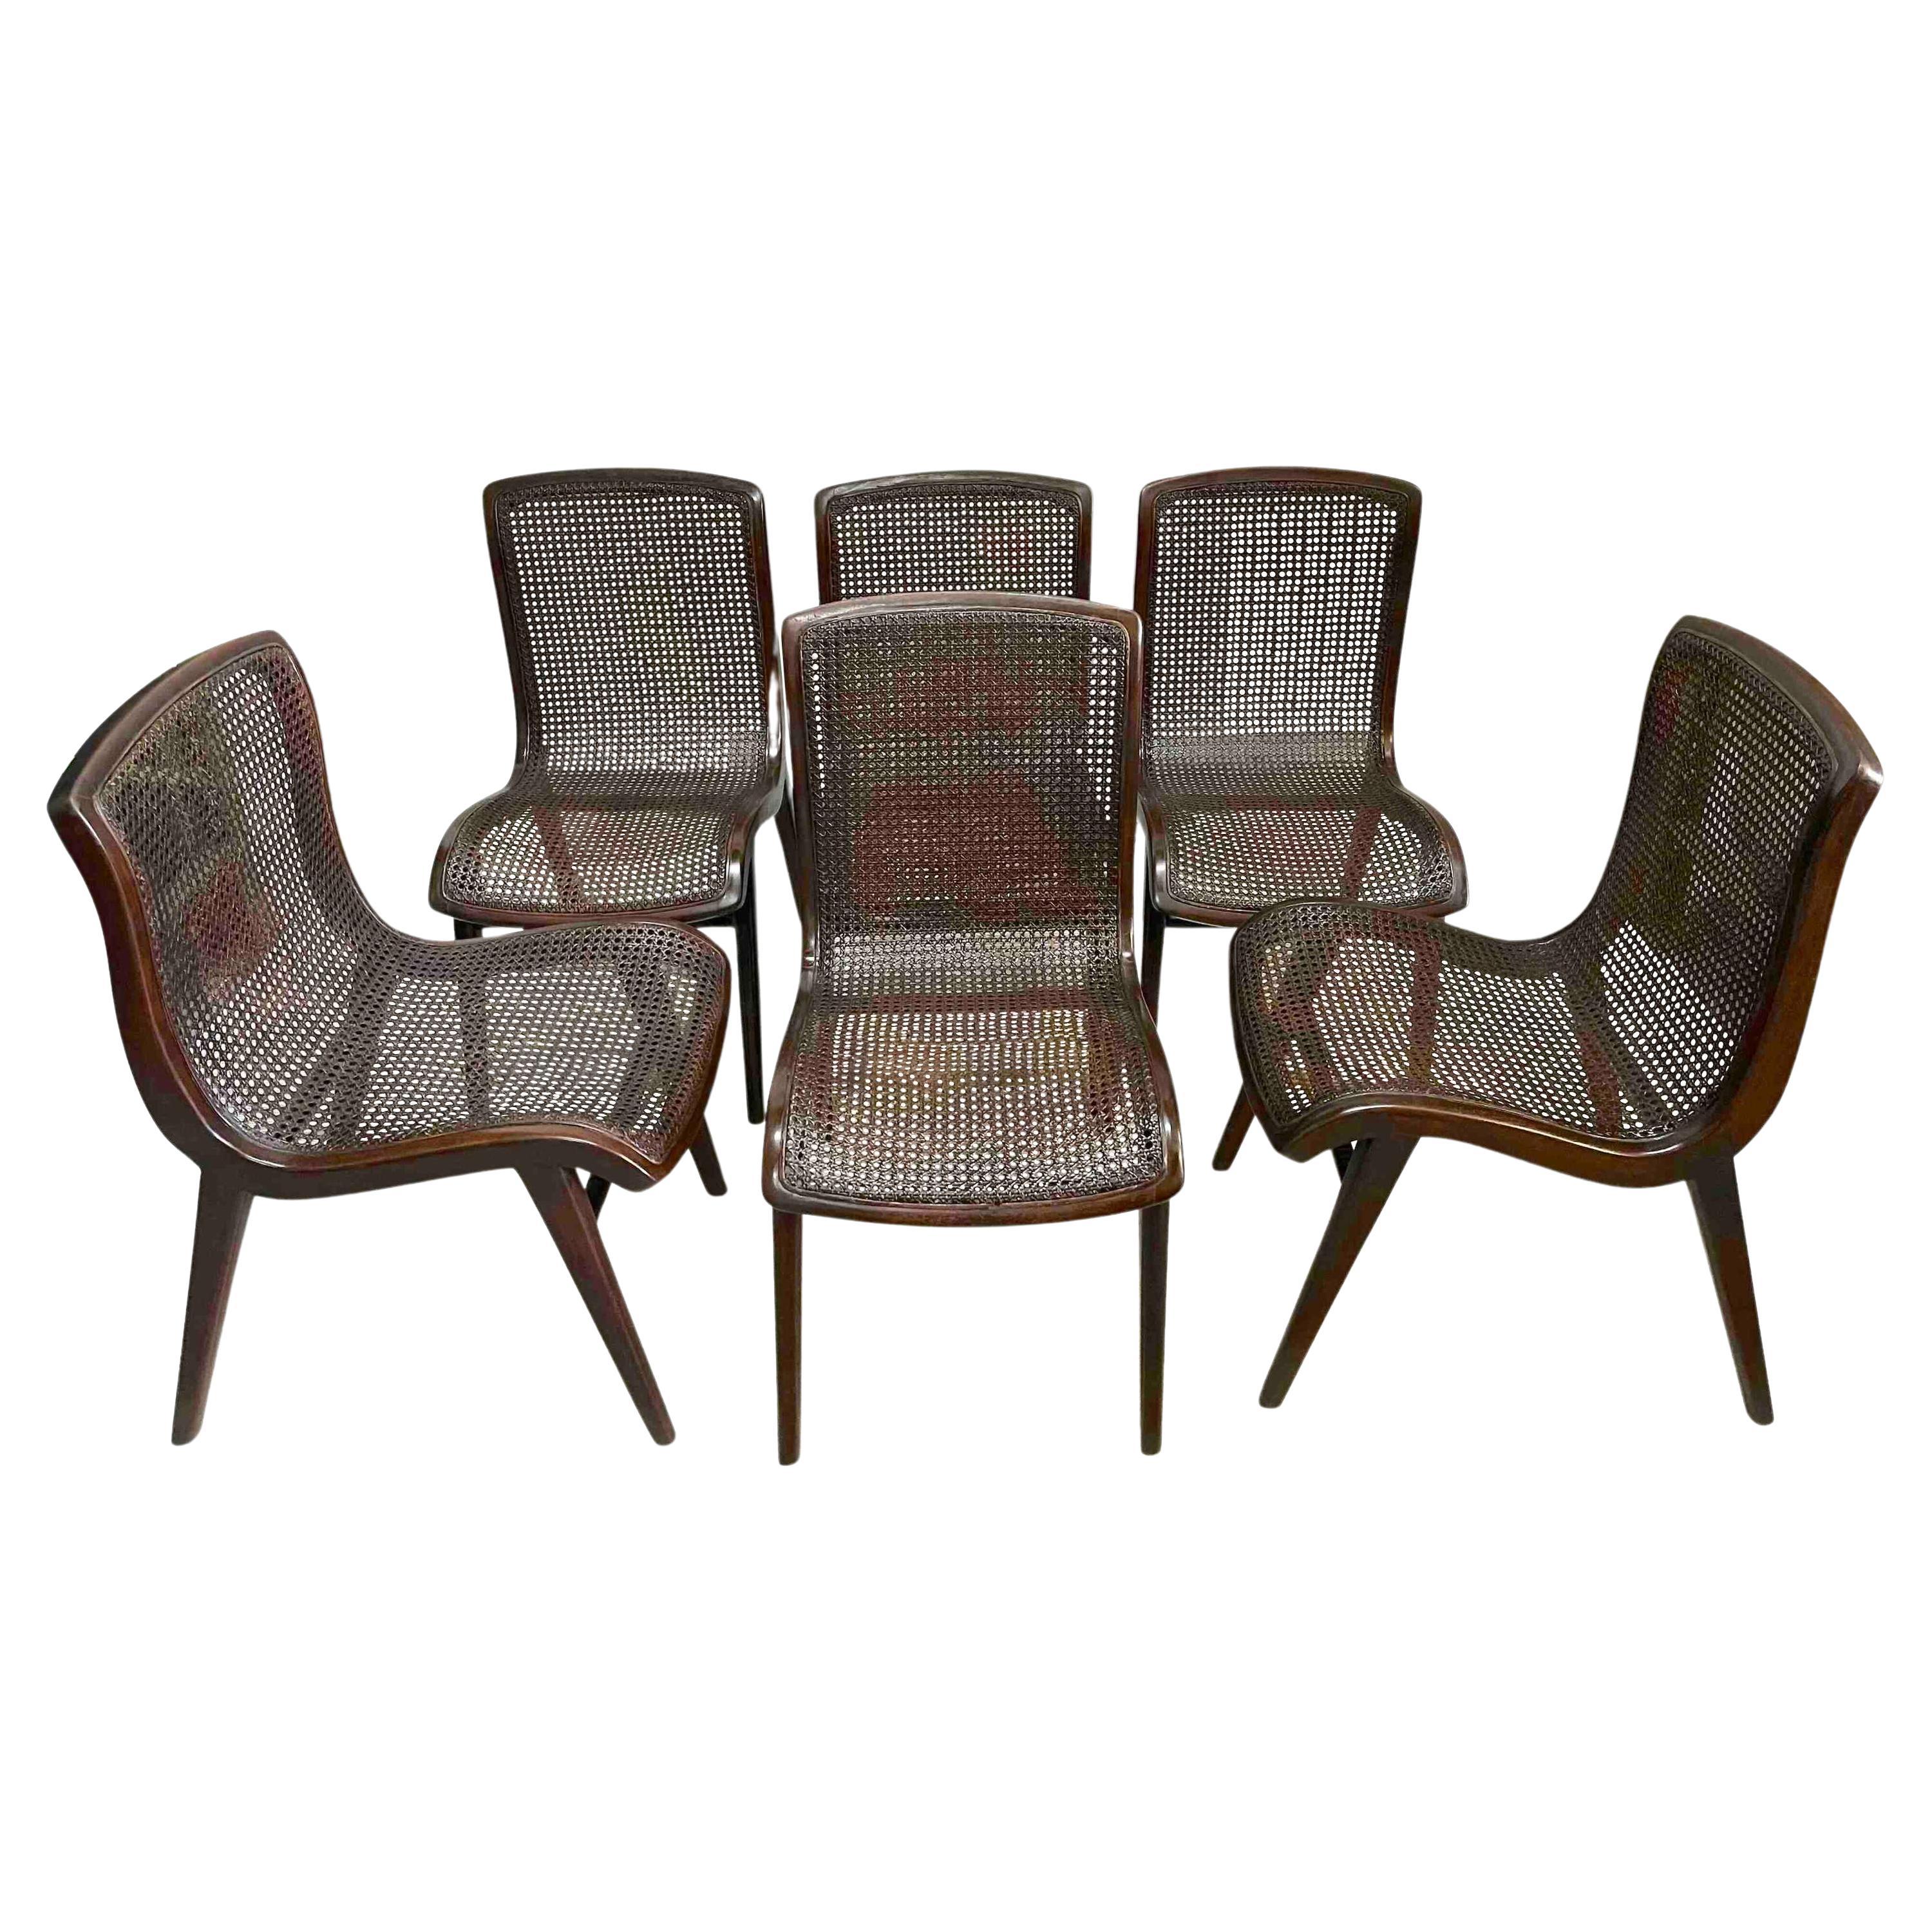 Set Six Sleek French Modern Cantilever Woven Cane Dining Chairs